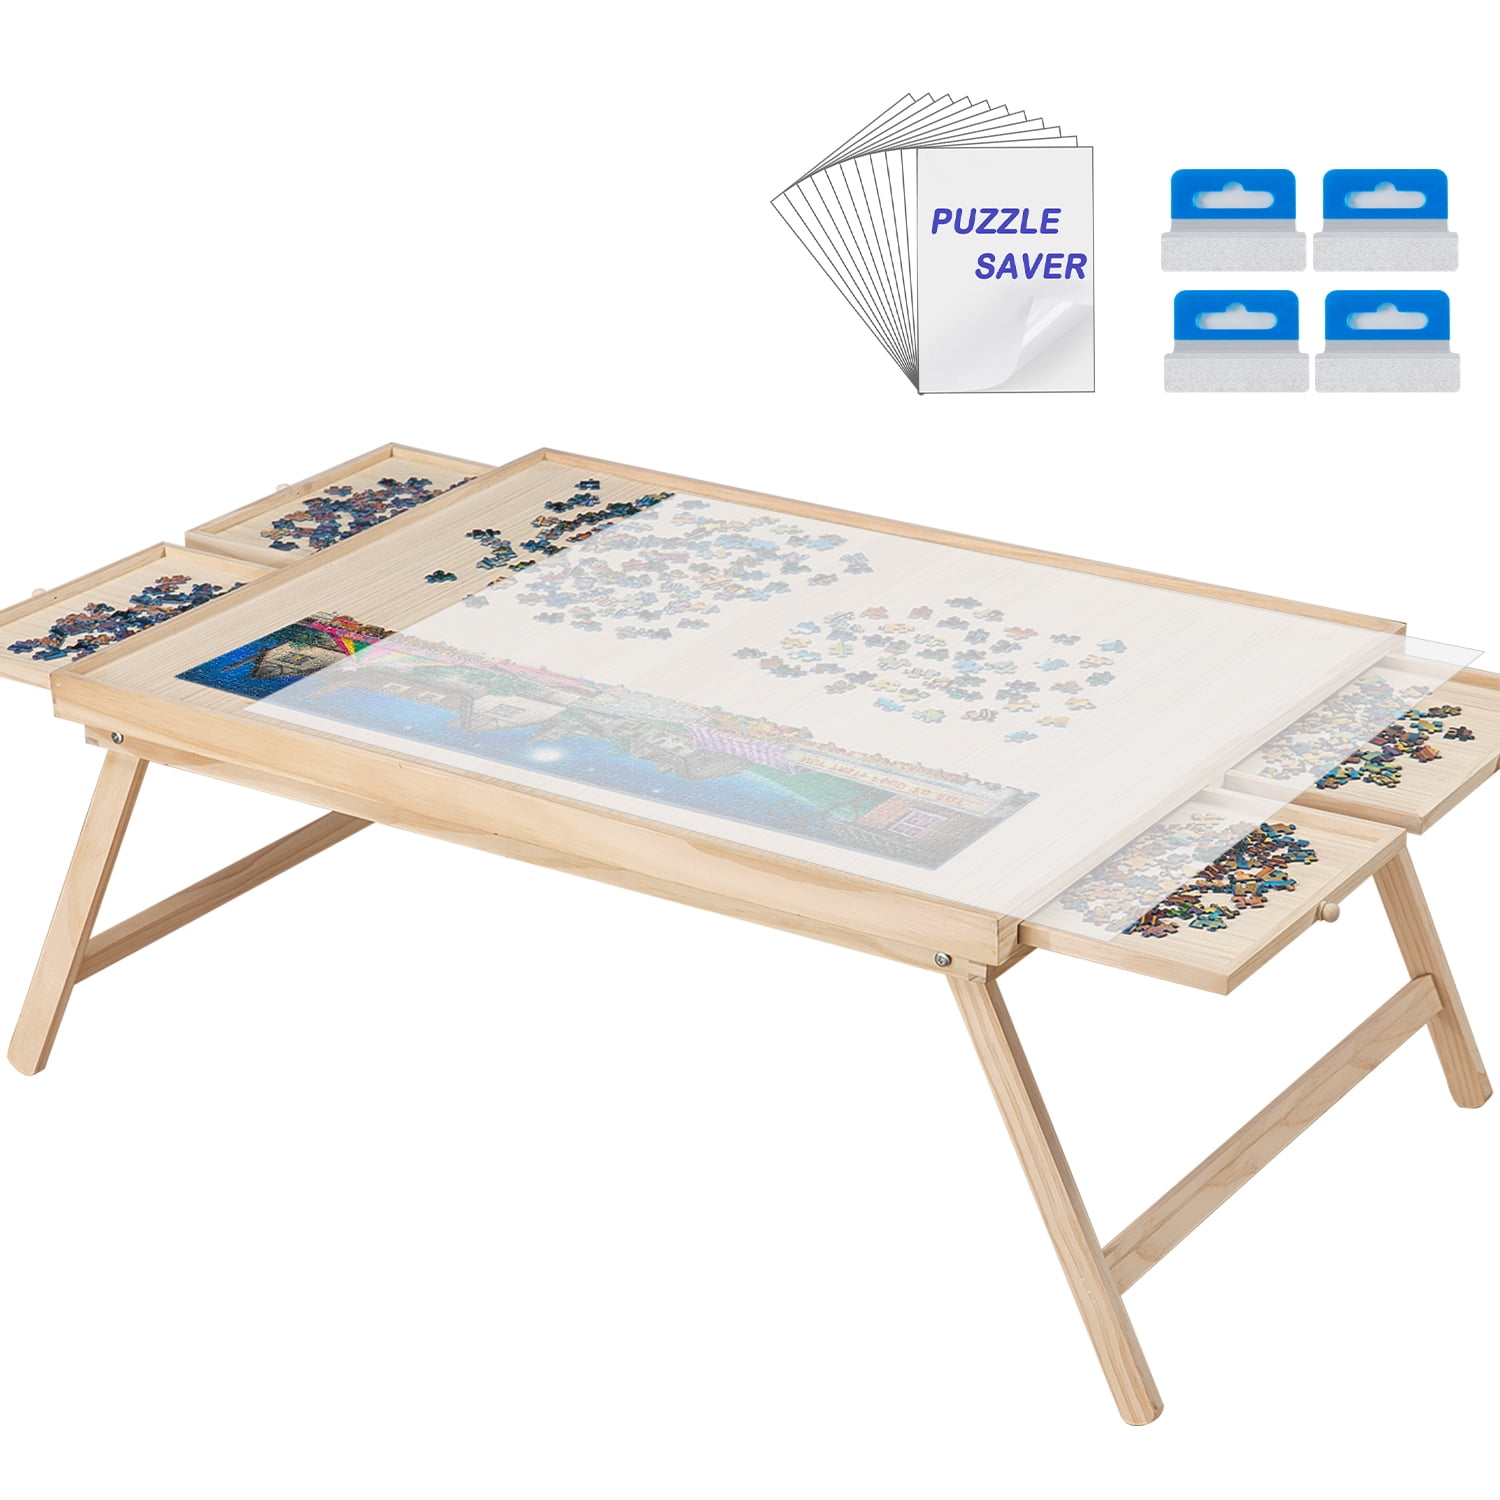 1500 Piece Wooden Jigsaw Puzzle Table Puzzle Easel - with Wooden